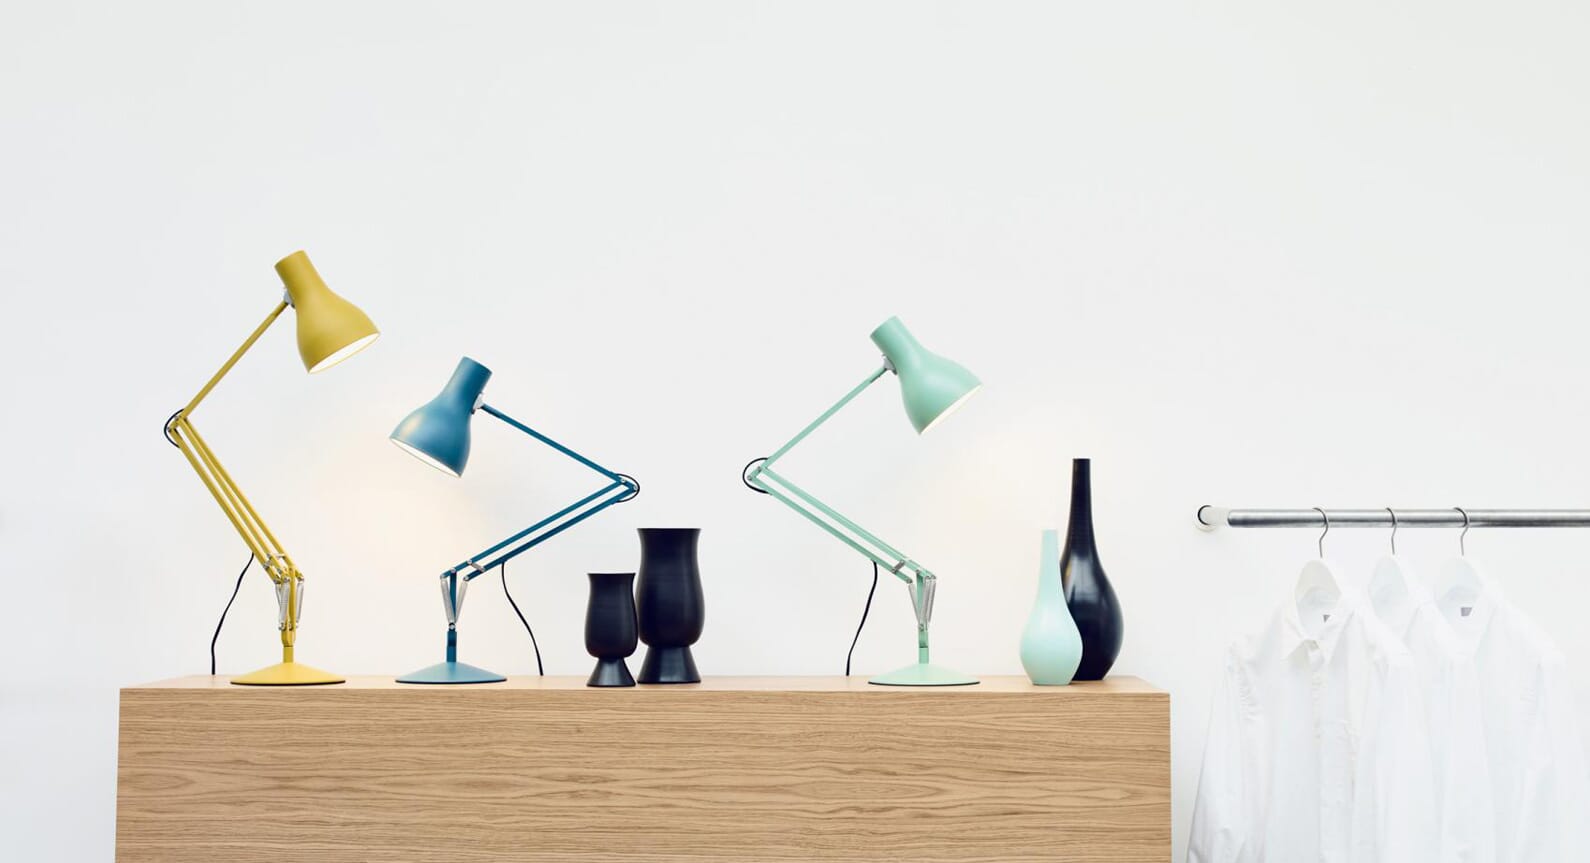 Why There’s More To Anglepoise Than You May Think